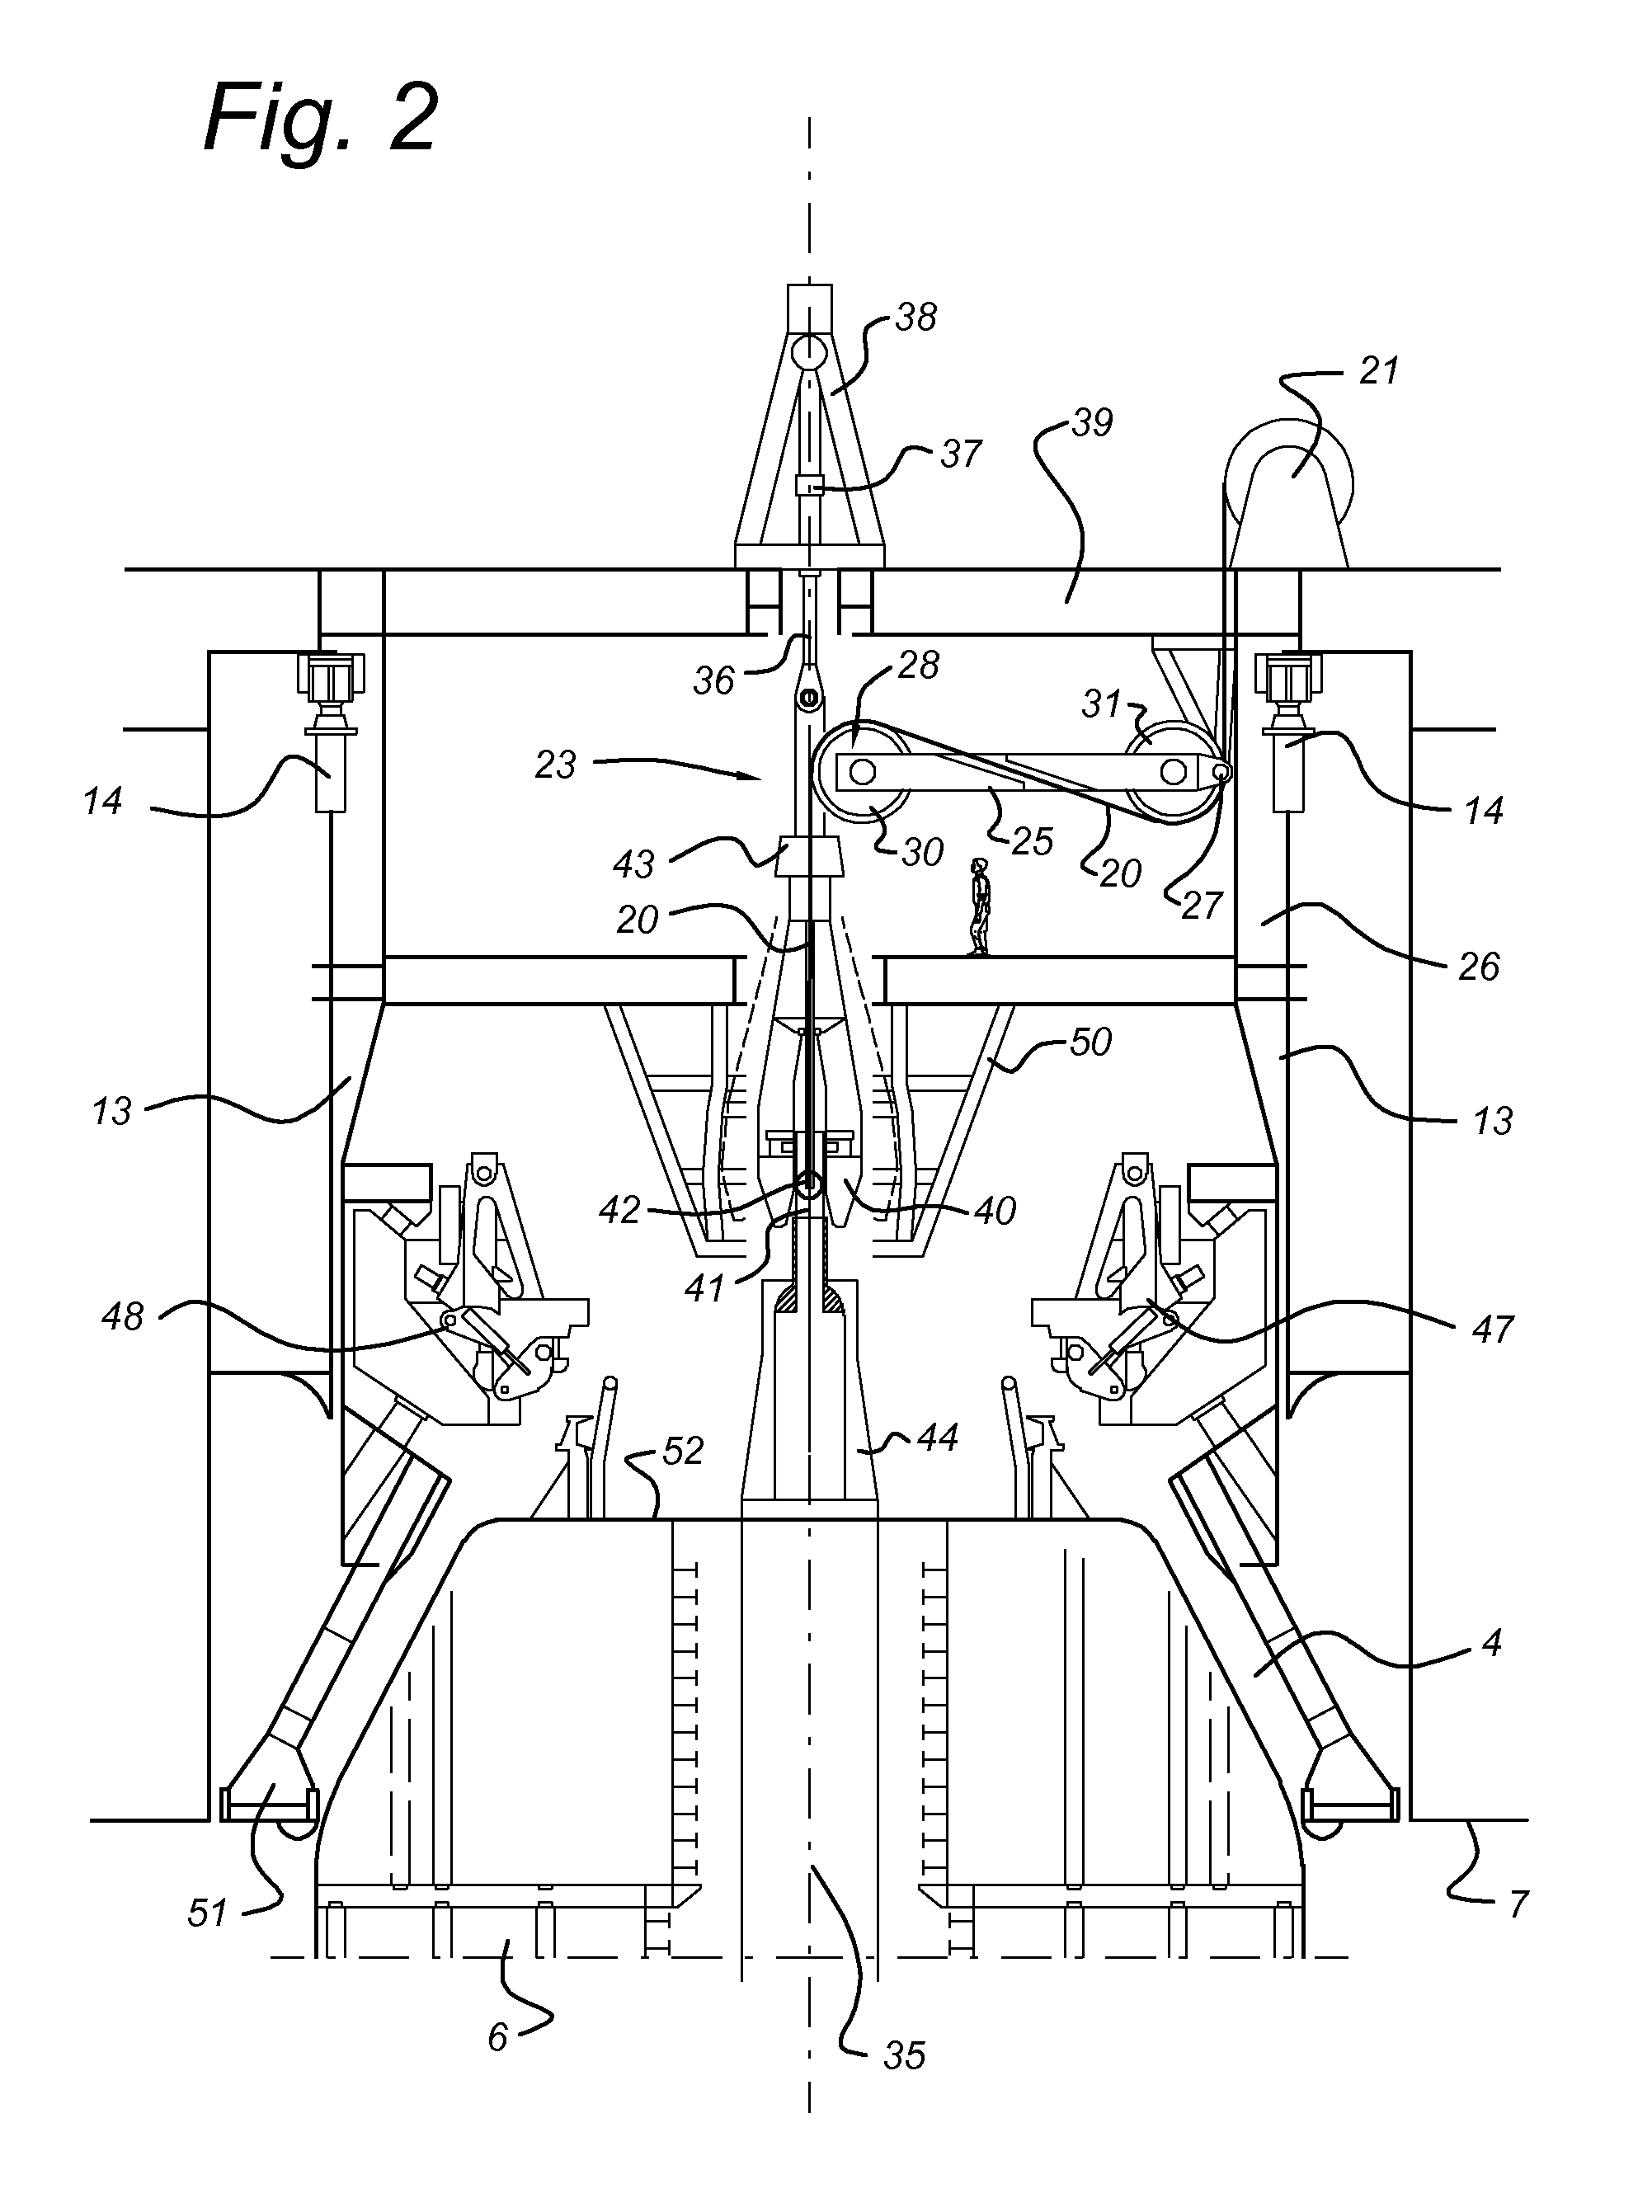 Vessel comprising a mooring connector with a heave compensator